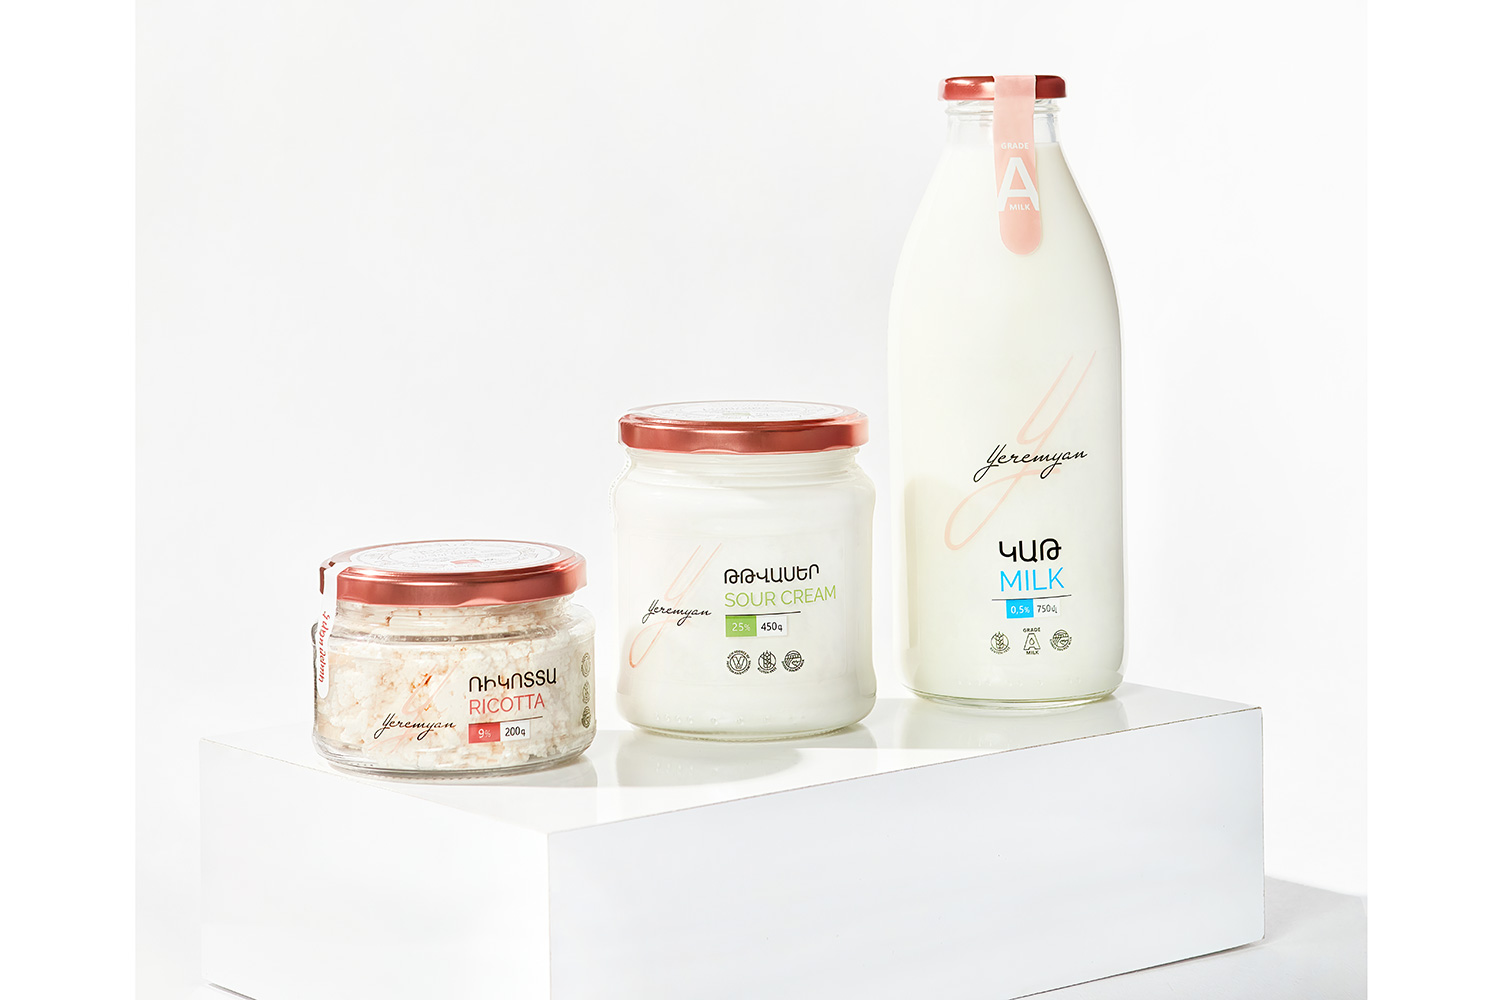 Yeremyan Products: Grade “A” dairy and complete information for consumer